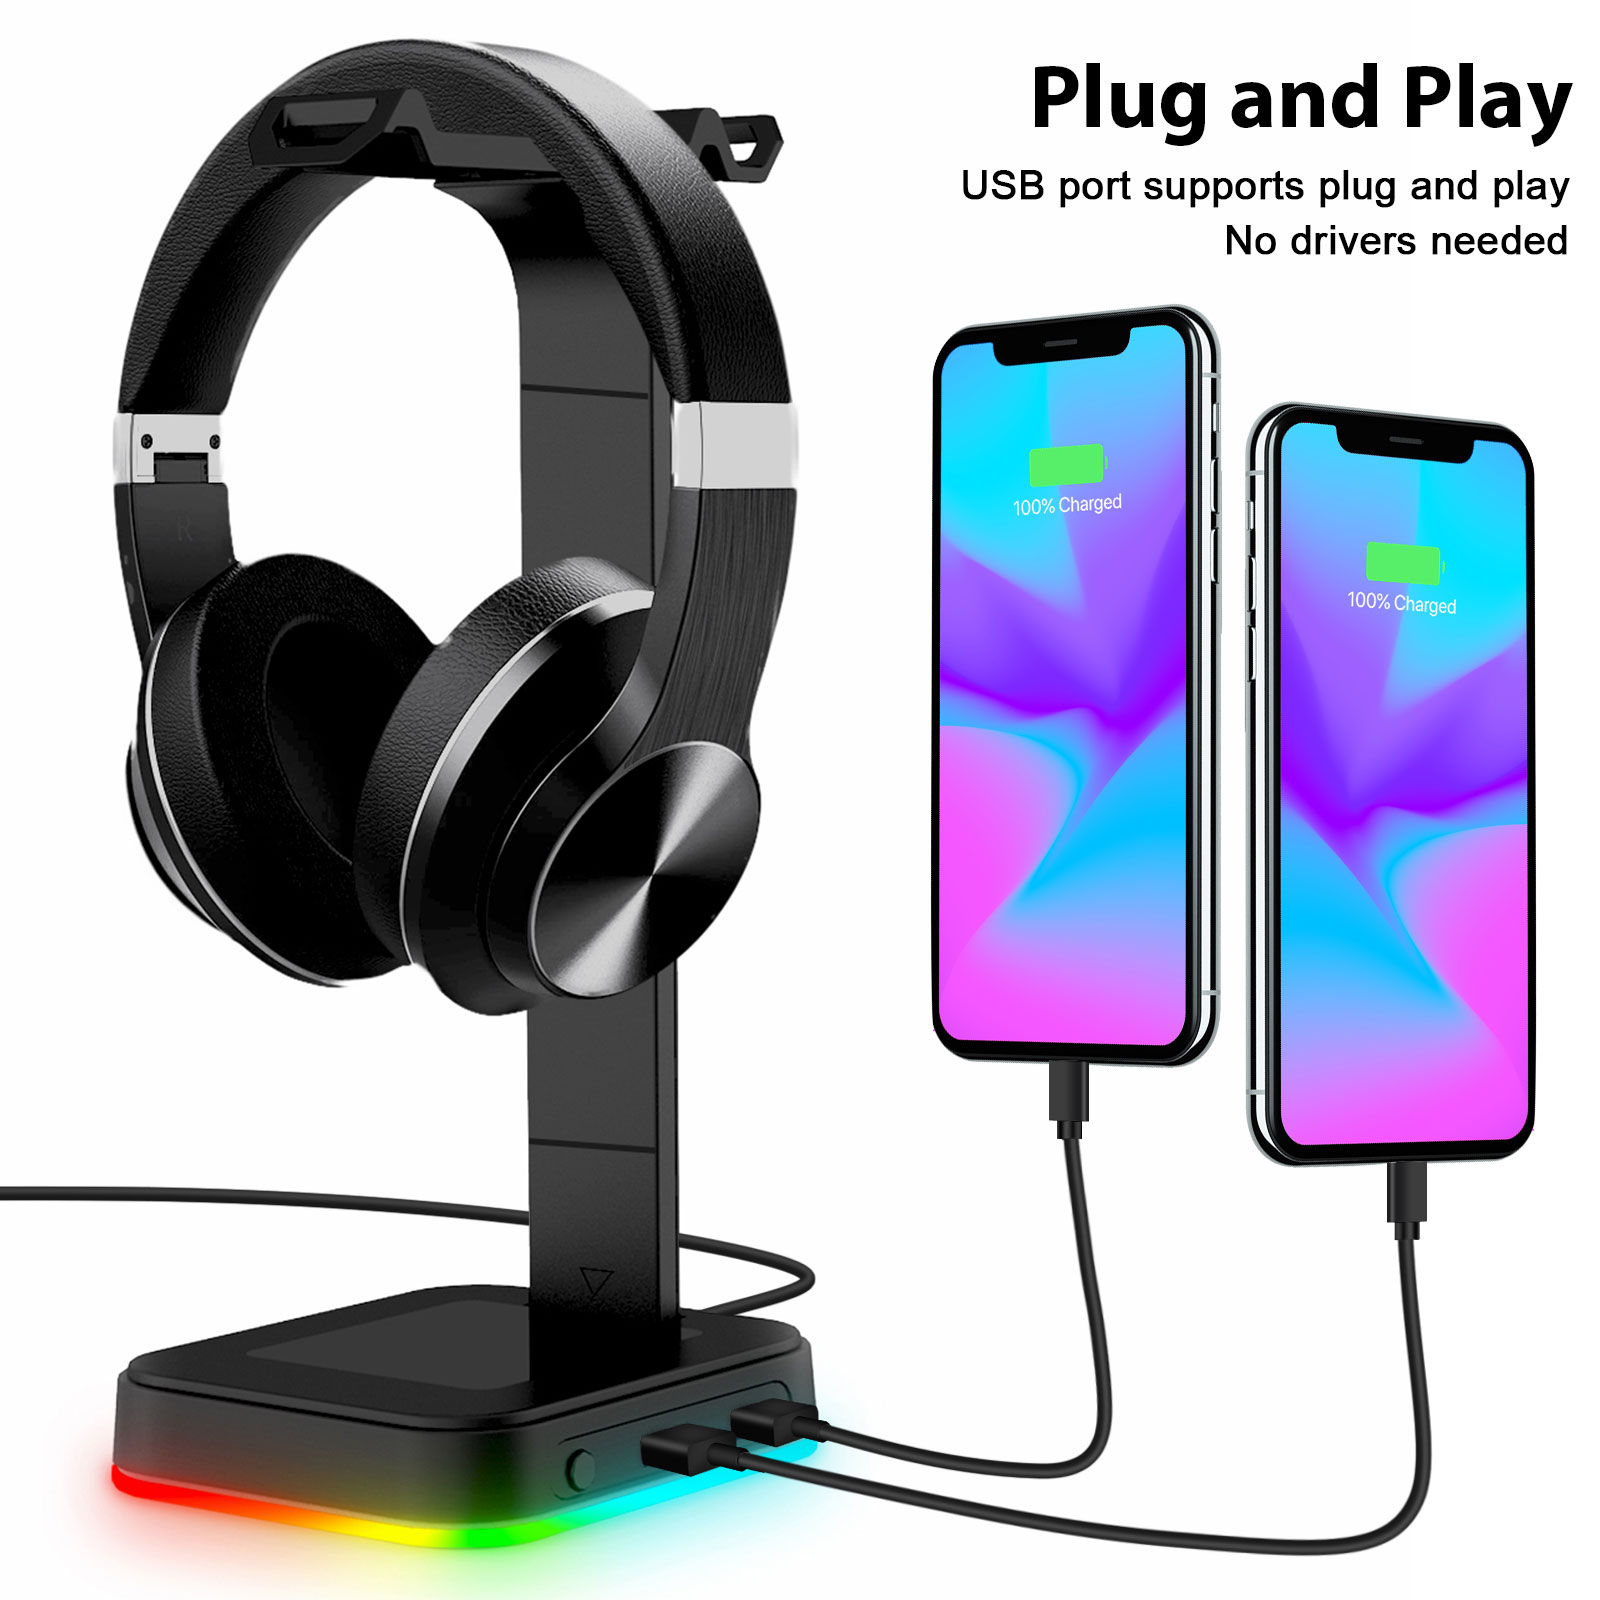 RGB Headphone Stand with USB Ports - Gaming Desk Accessory